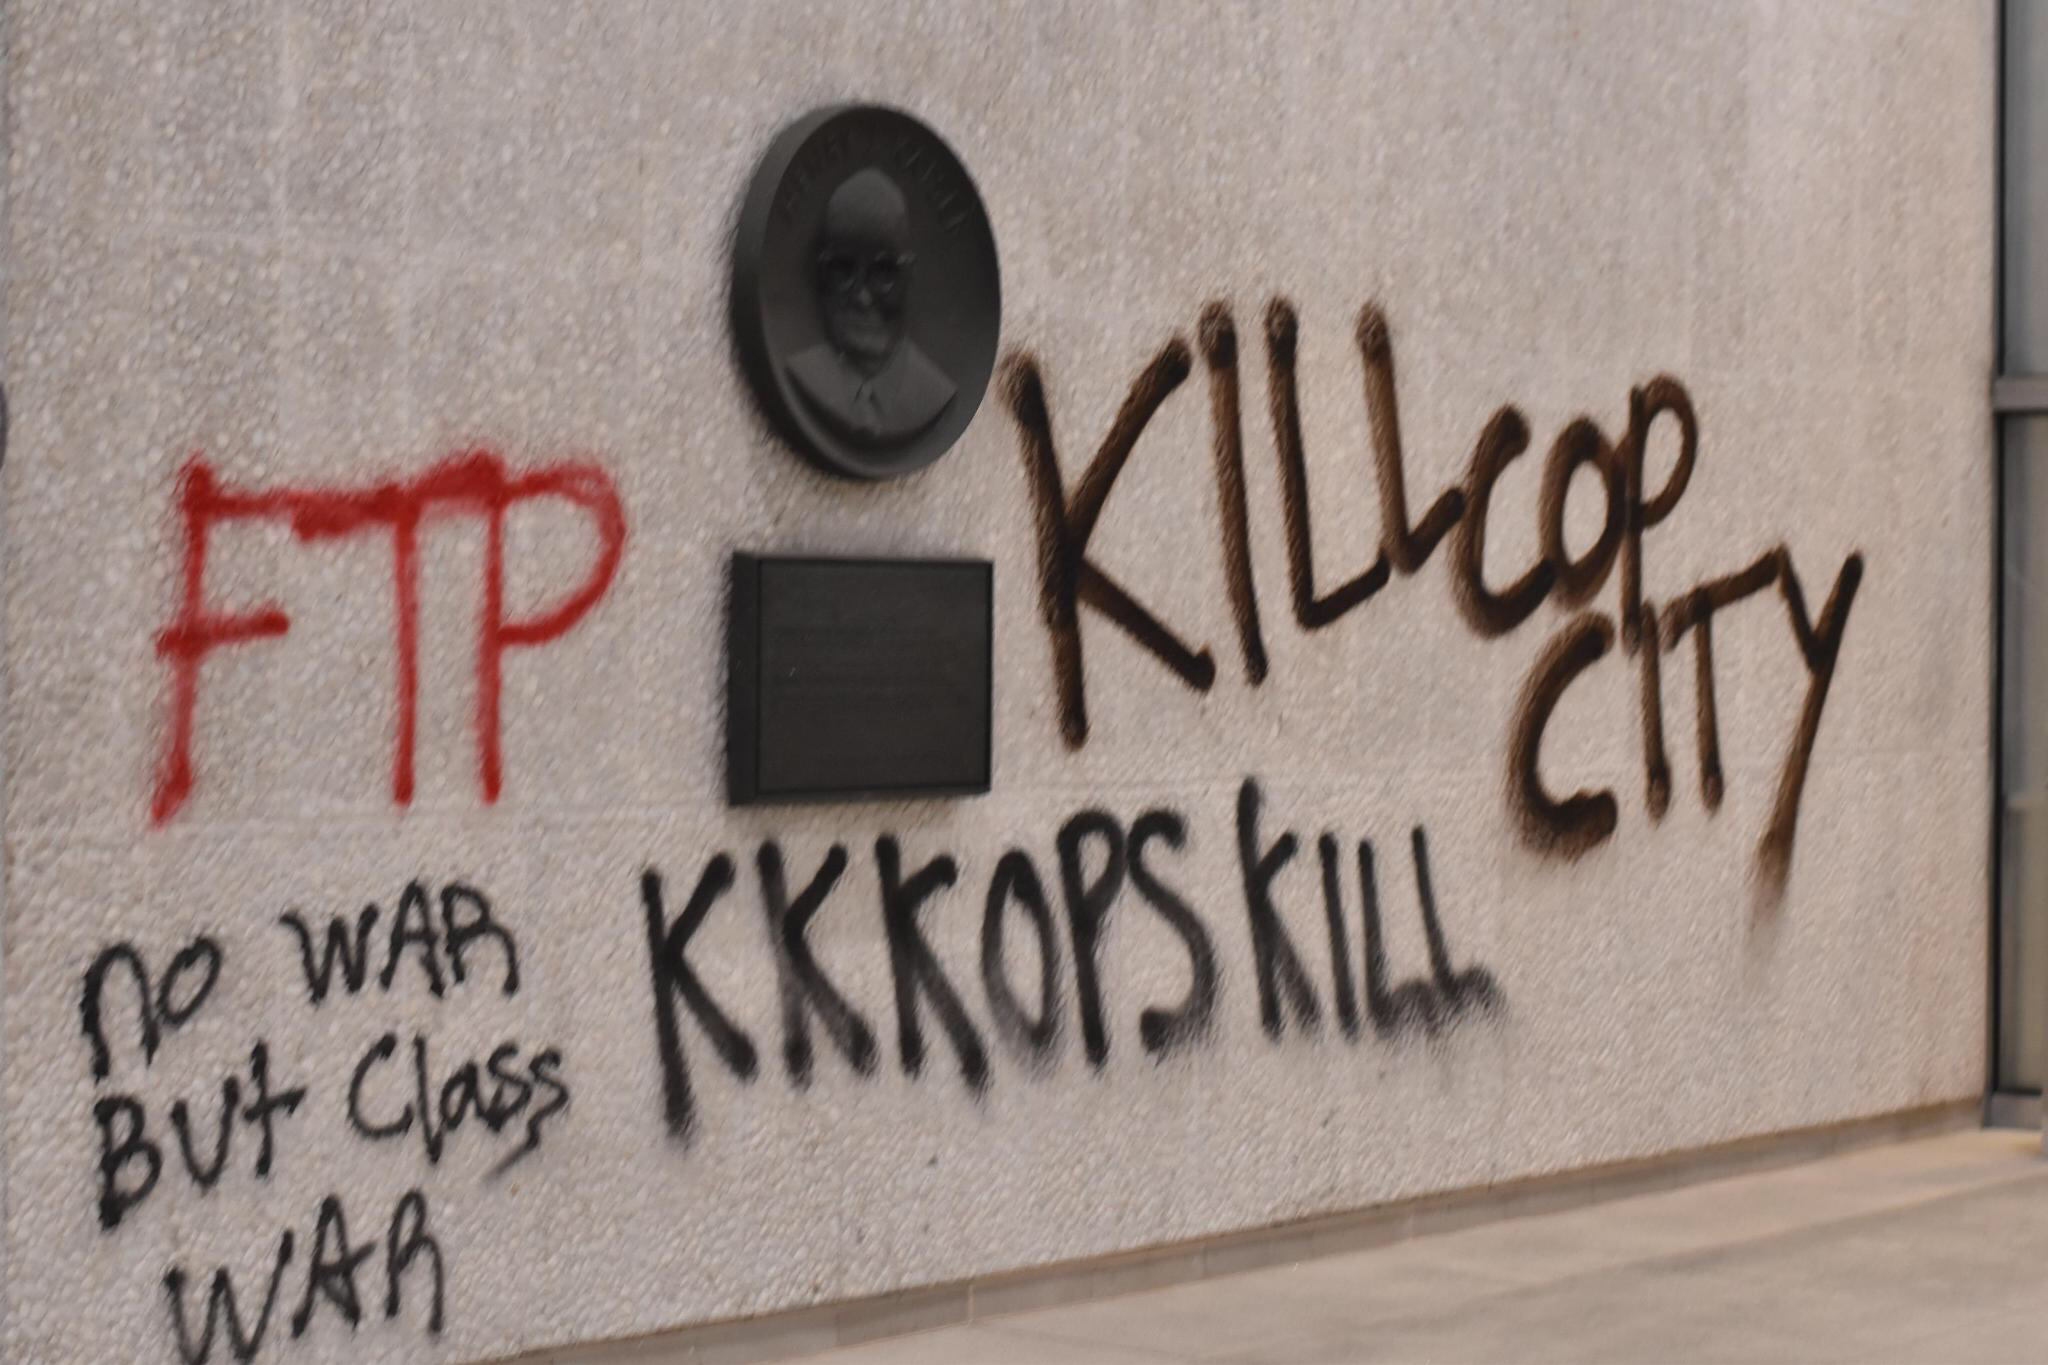 Onto a concrete wall, "FTP" is tagged in red spray paint. "no war but class WAR," "KKKOPS KILL," and "KILL COP CITY" is  tagged in black spray paint.